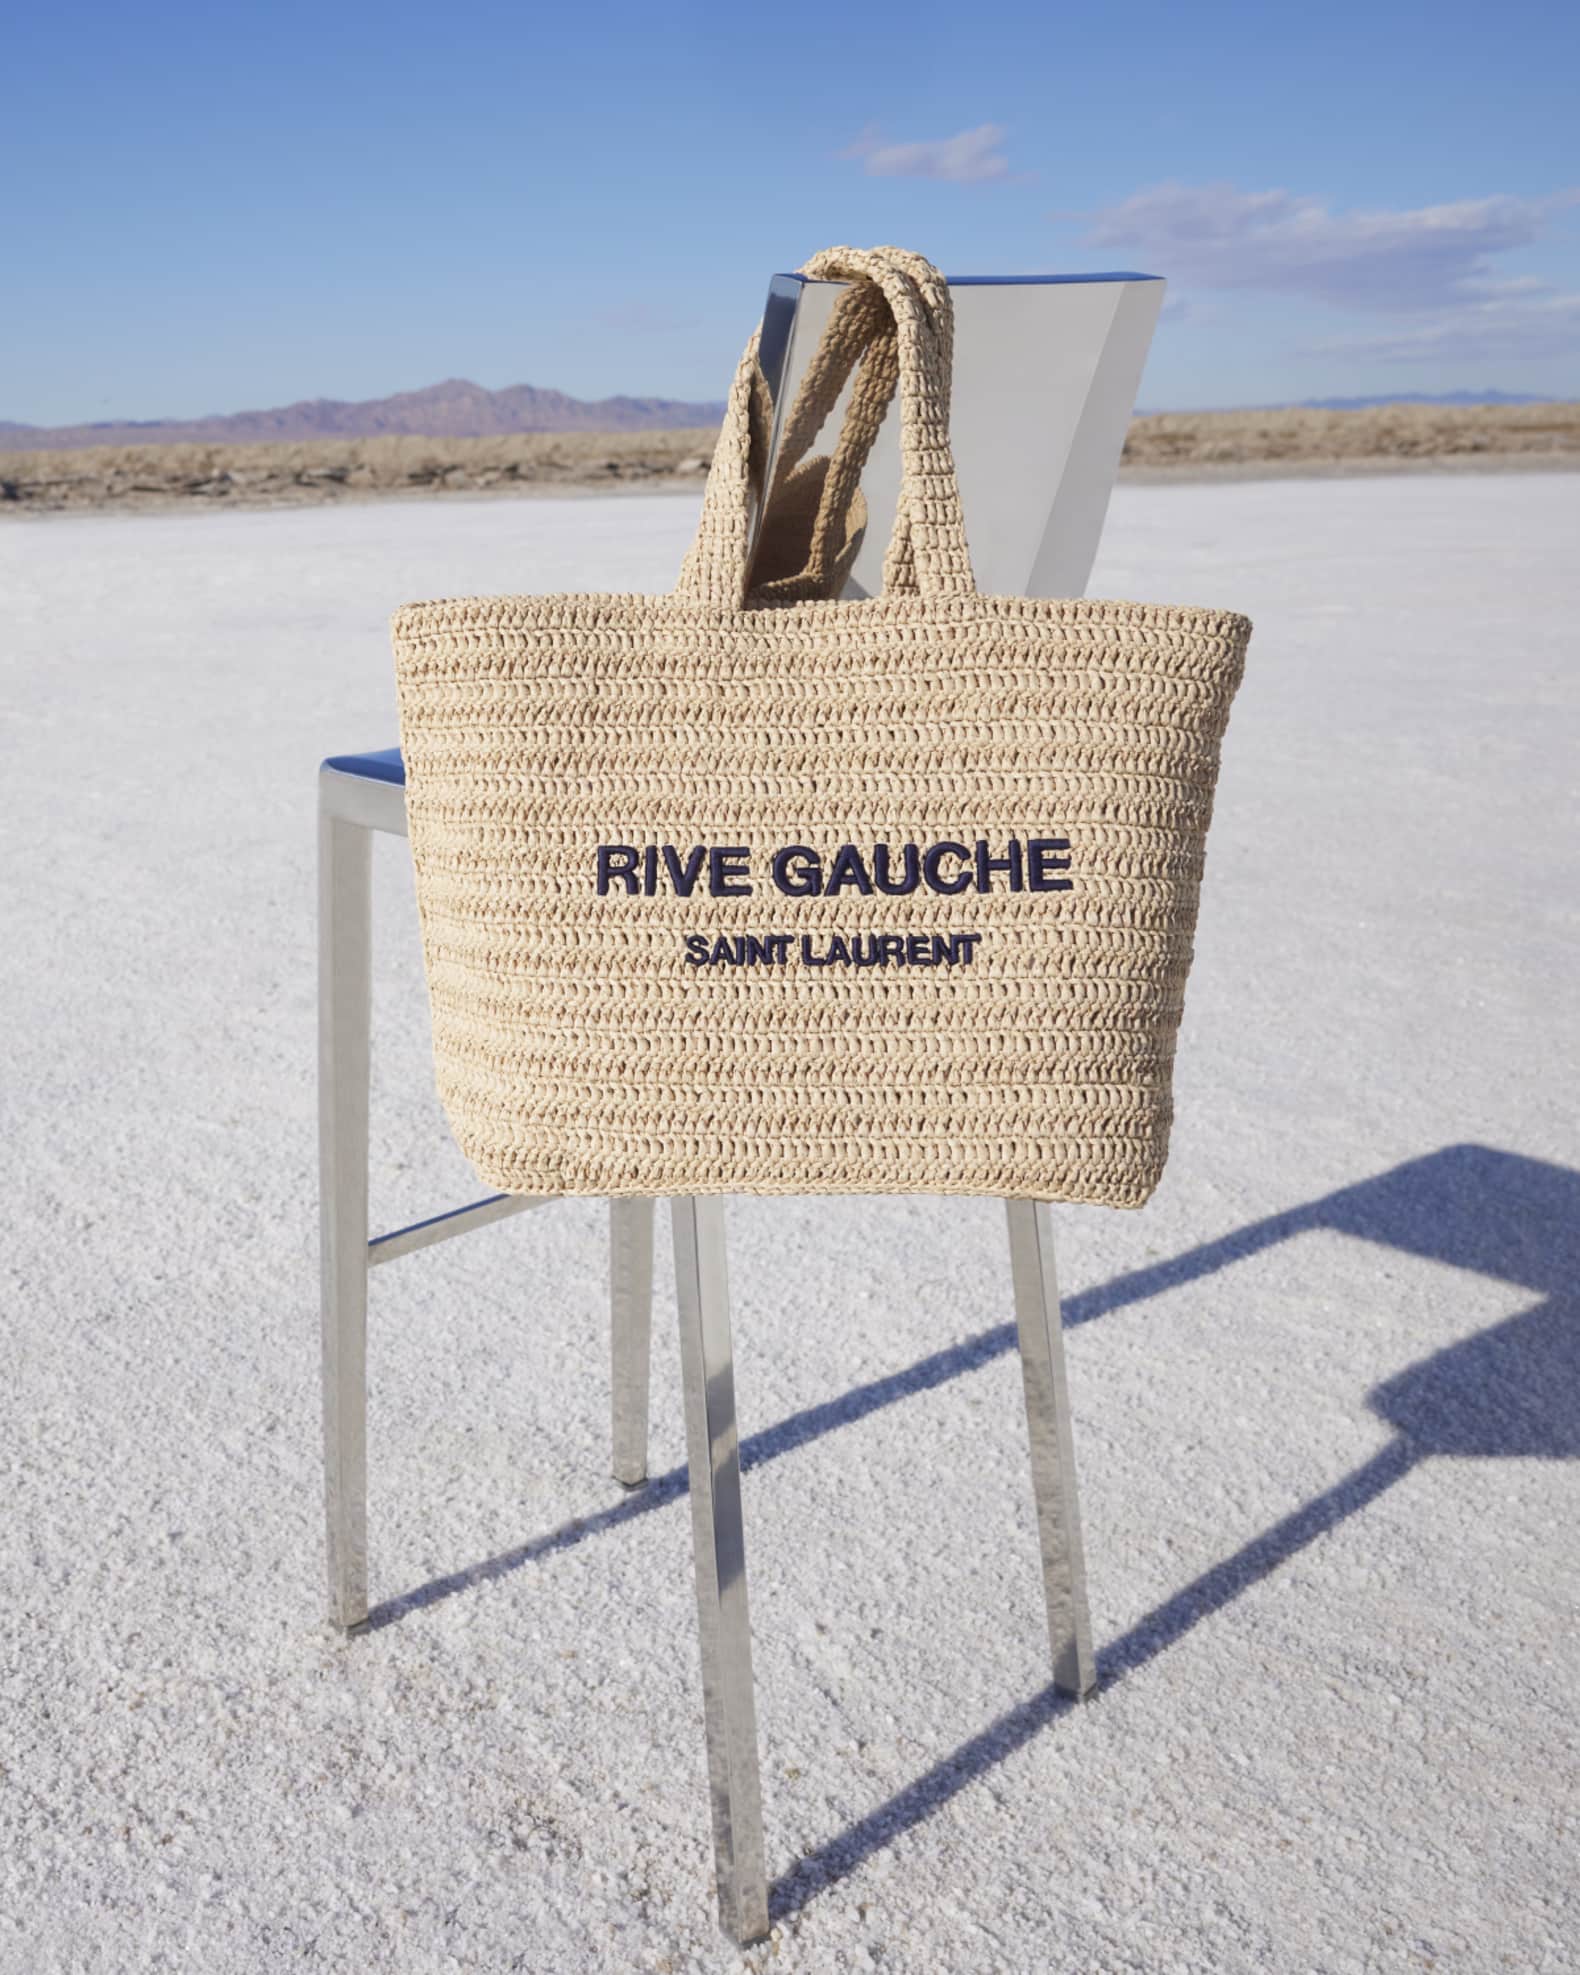 Rive gauche large tote bag in embroidered raffia and leather